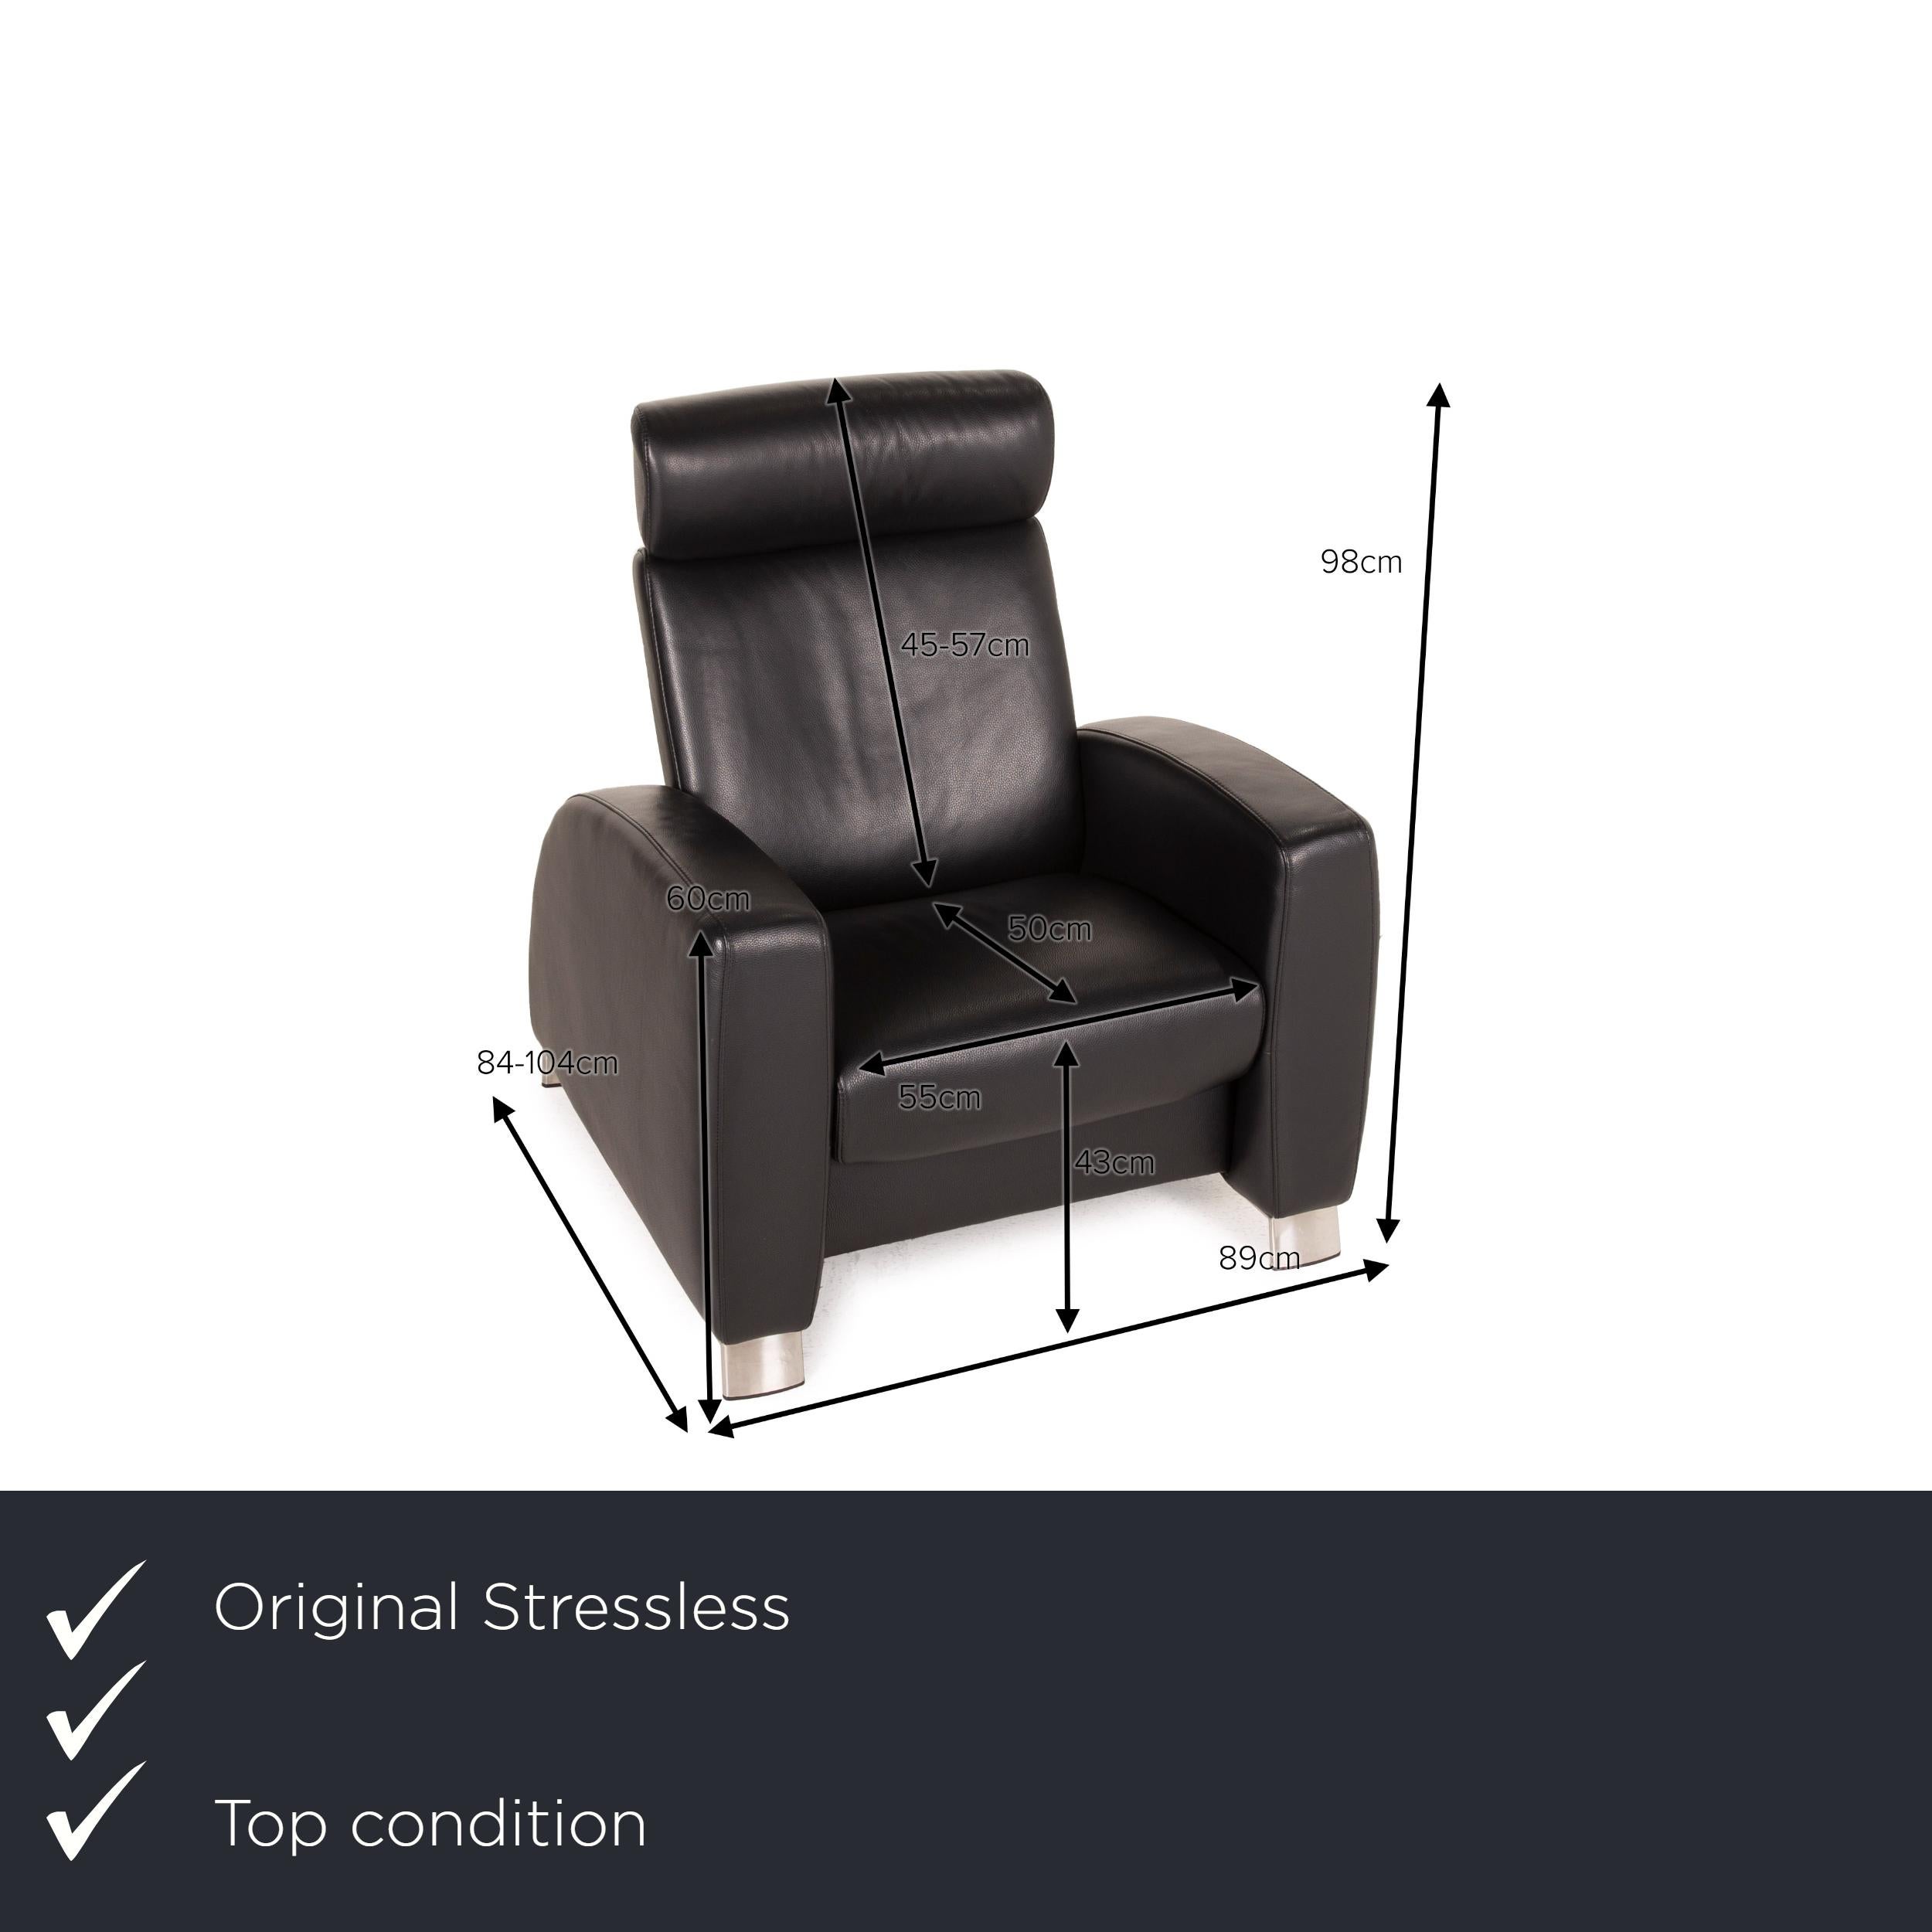 We present to you a stressless Arion leather armchair black relax function.
 

 Product measurements in centimeters:
 

Depth: 84
Width: 89
Height: 98
Seat height: 43
Rest height: 60
Seat depth: 50
Seat width: 55
Back height: 46.
  